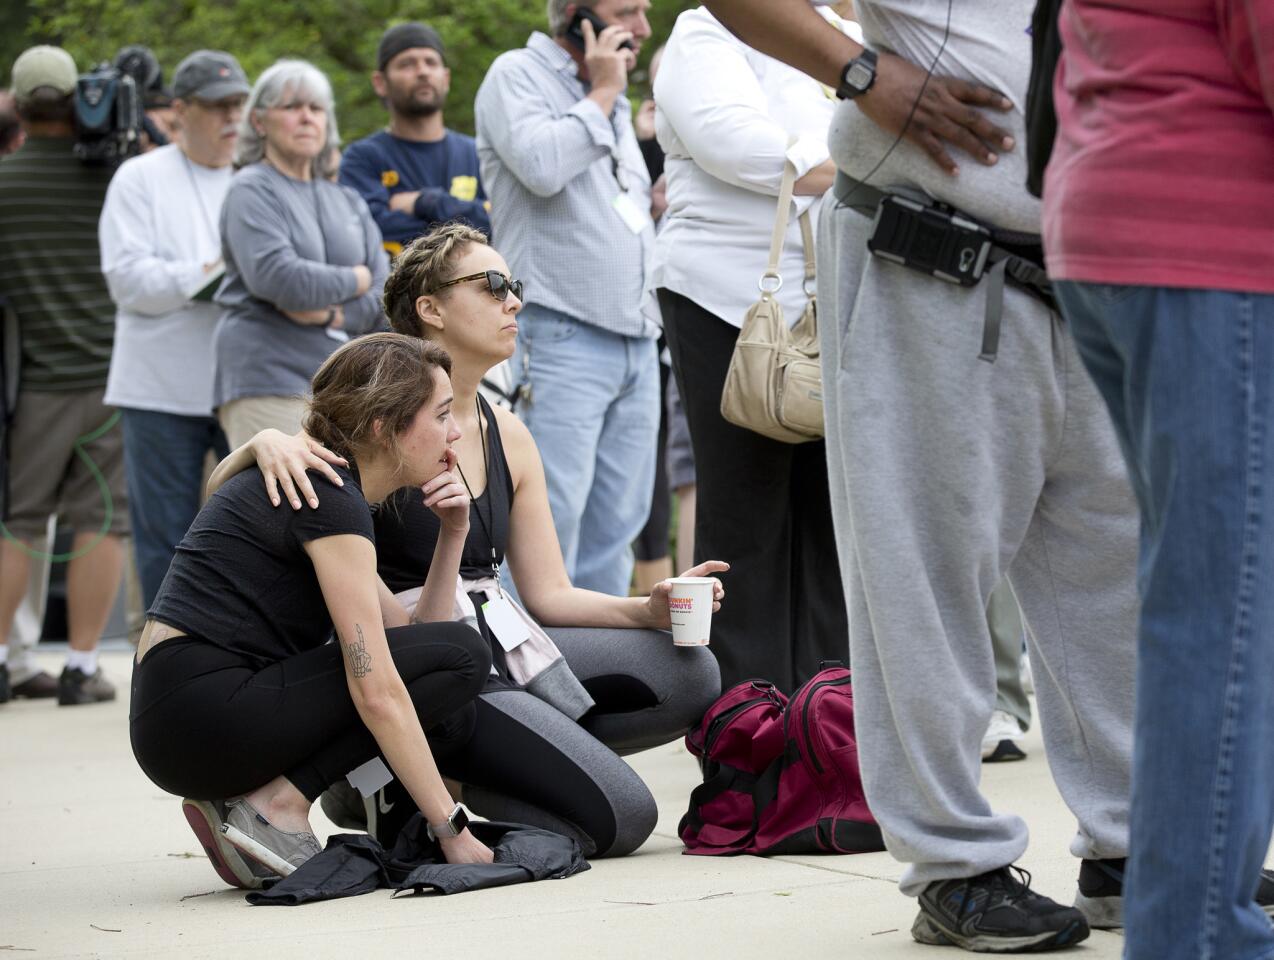 Kali Harris, left, and Kelly McMillan, right, wait outside of the Howard County Government offices to be escorted to their properties on Main Street to gather belongings and begin to assess their damages on Tuesday, May 29, 2018. Harris lives and works on Main Street at Salon Marielle and McMillan owns property on Main Street.